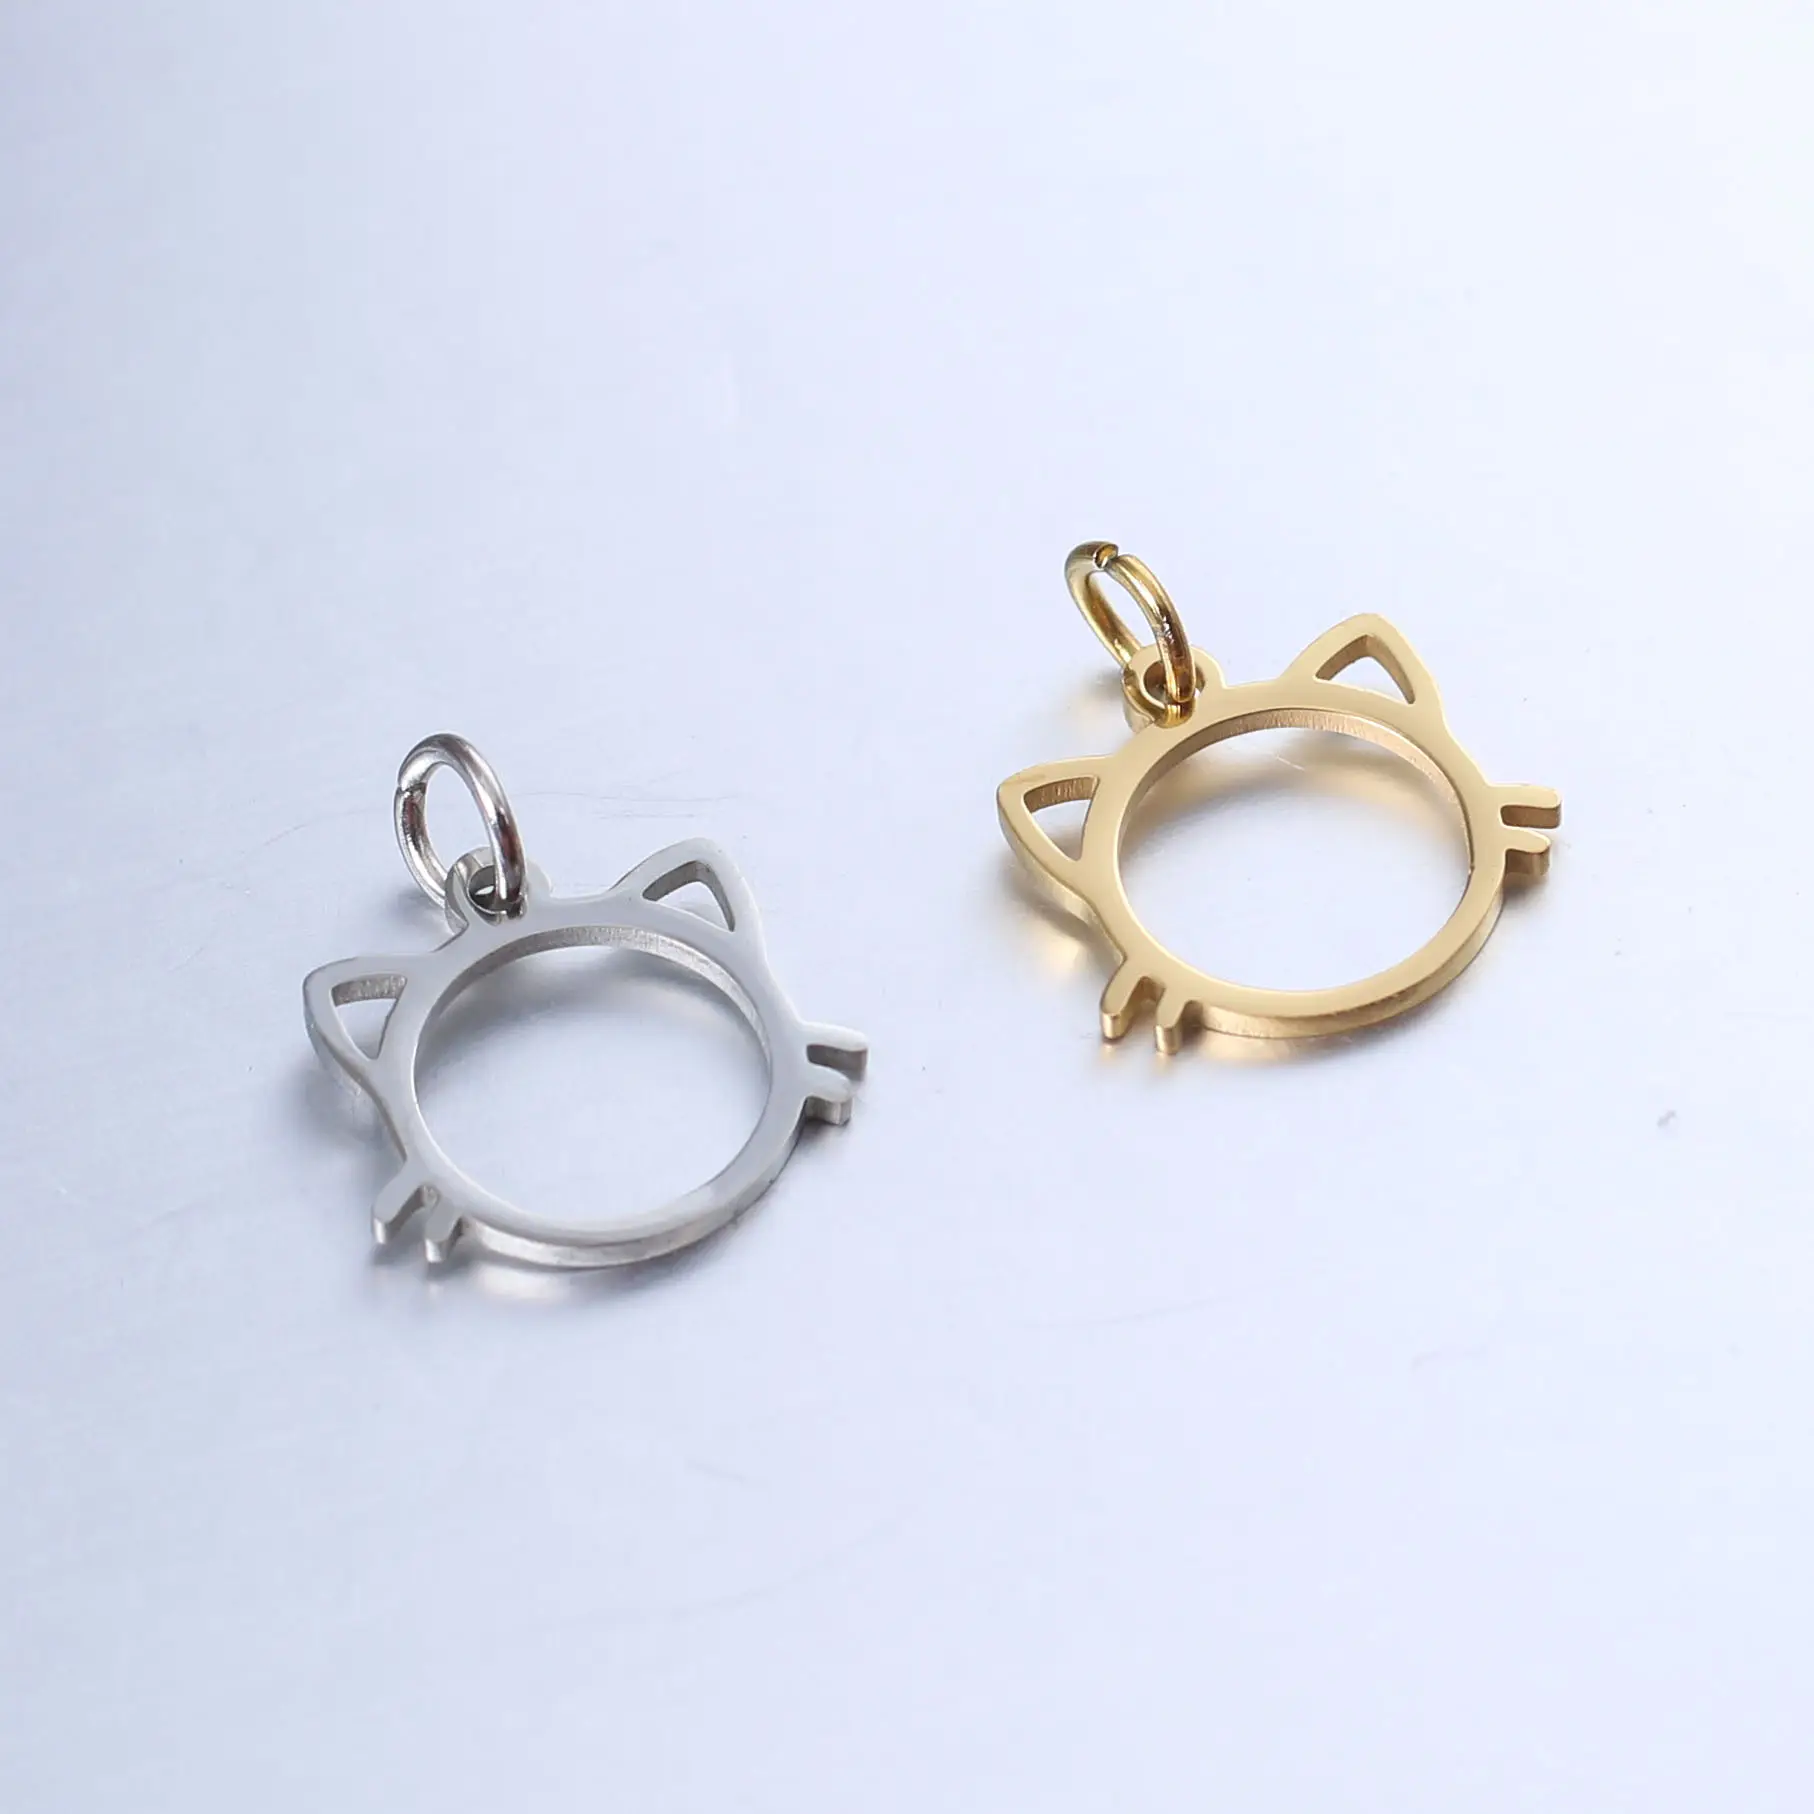 Stainless Steel Jewelry Cute Cat Pendant Simple Design Lovely Animal Charms for Necklace Jewelry Making